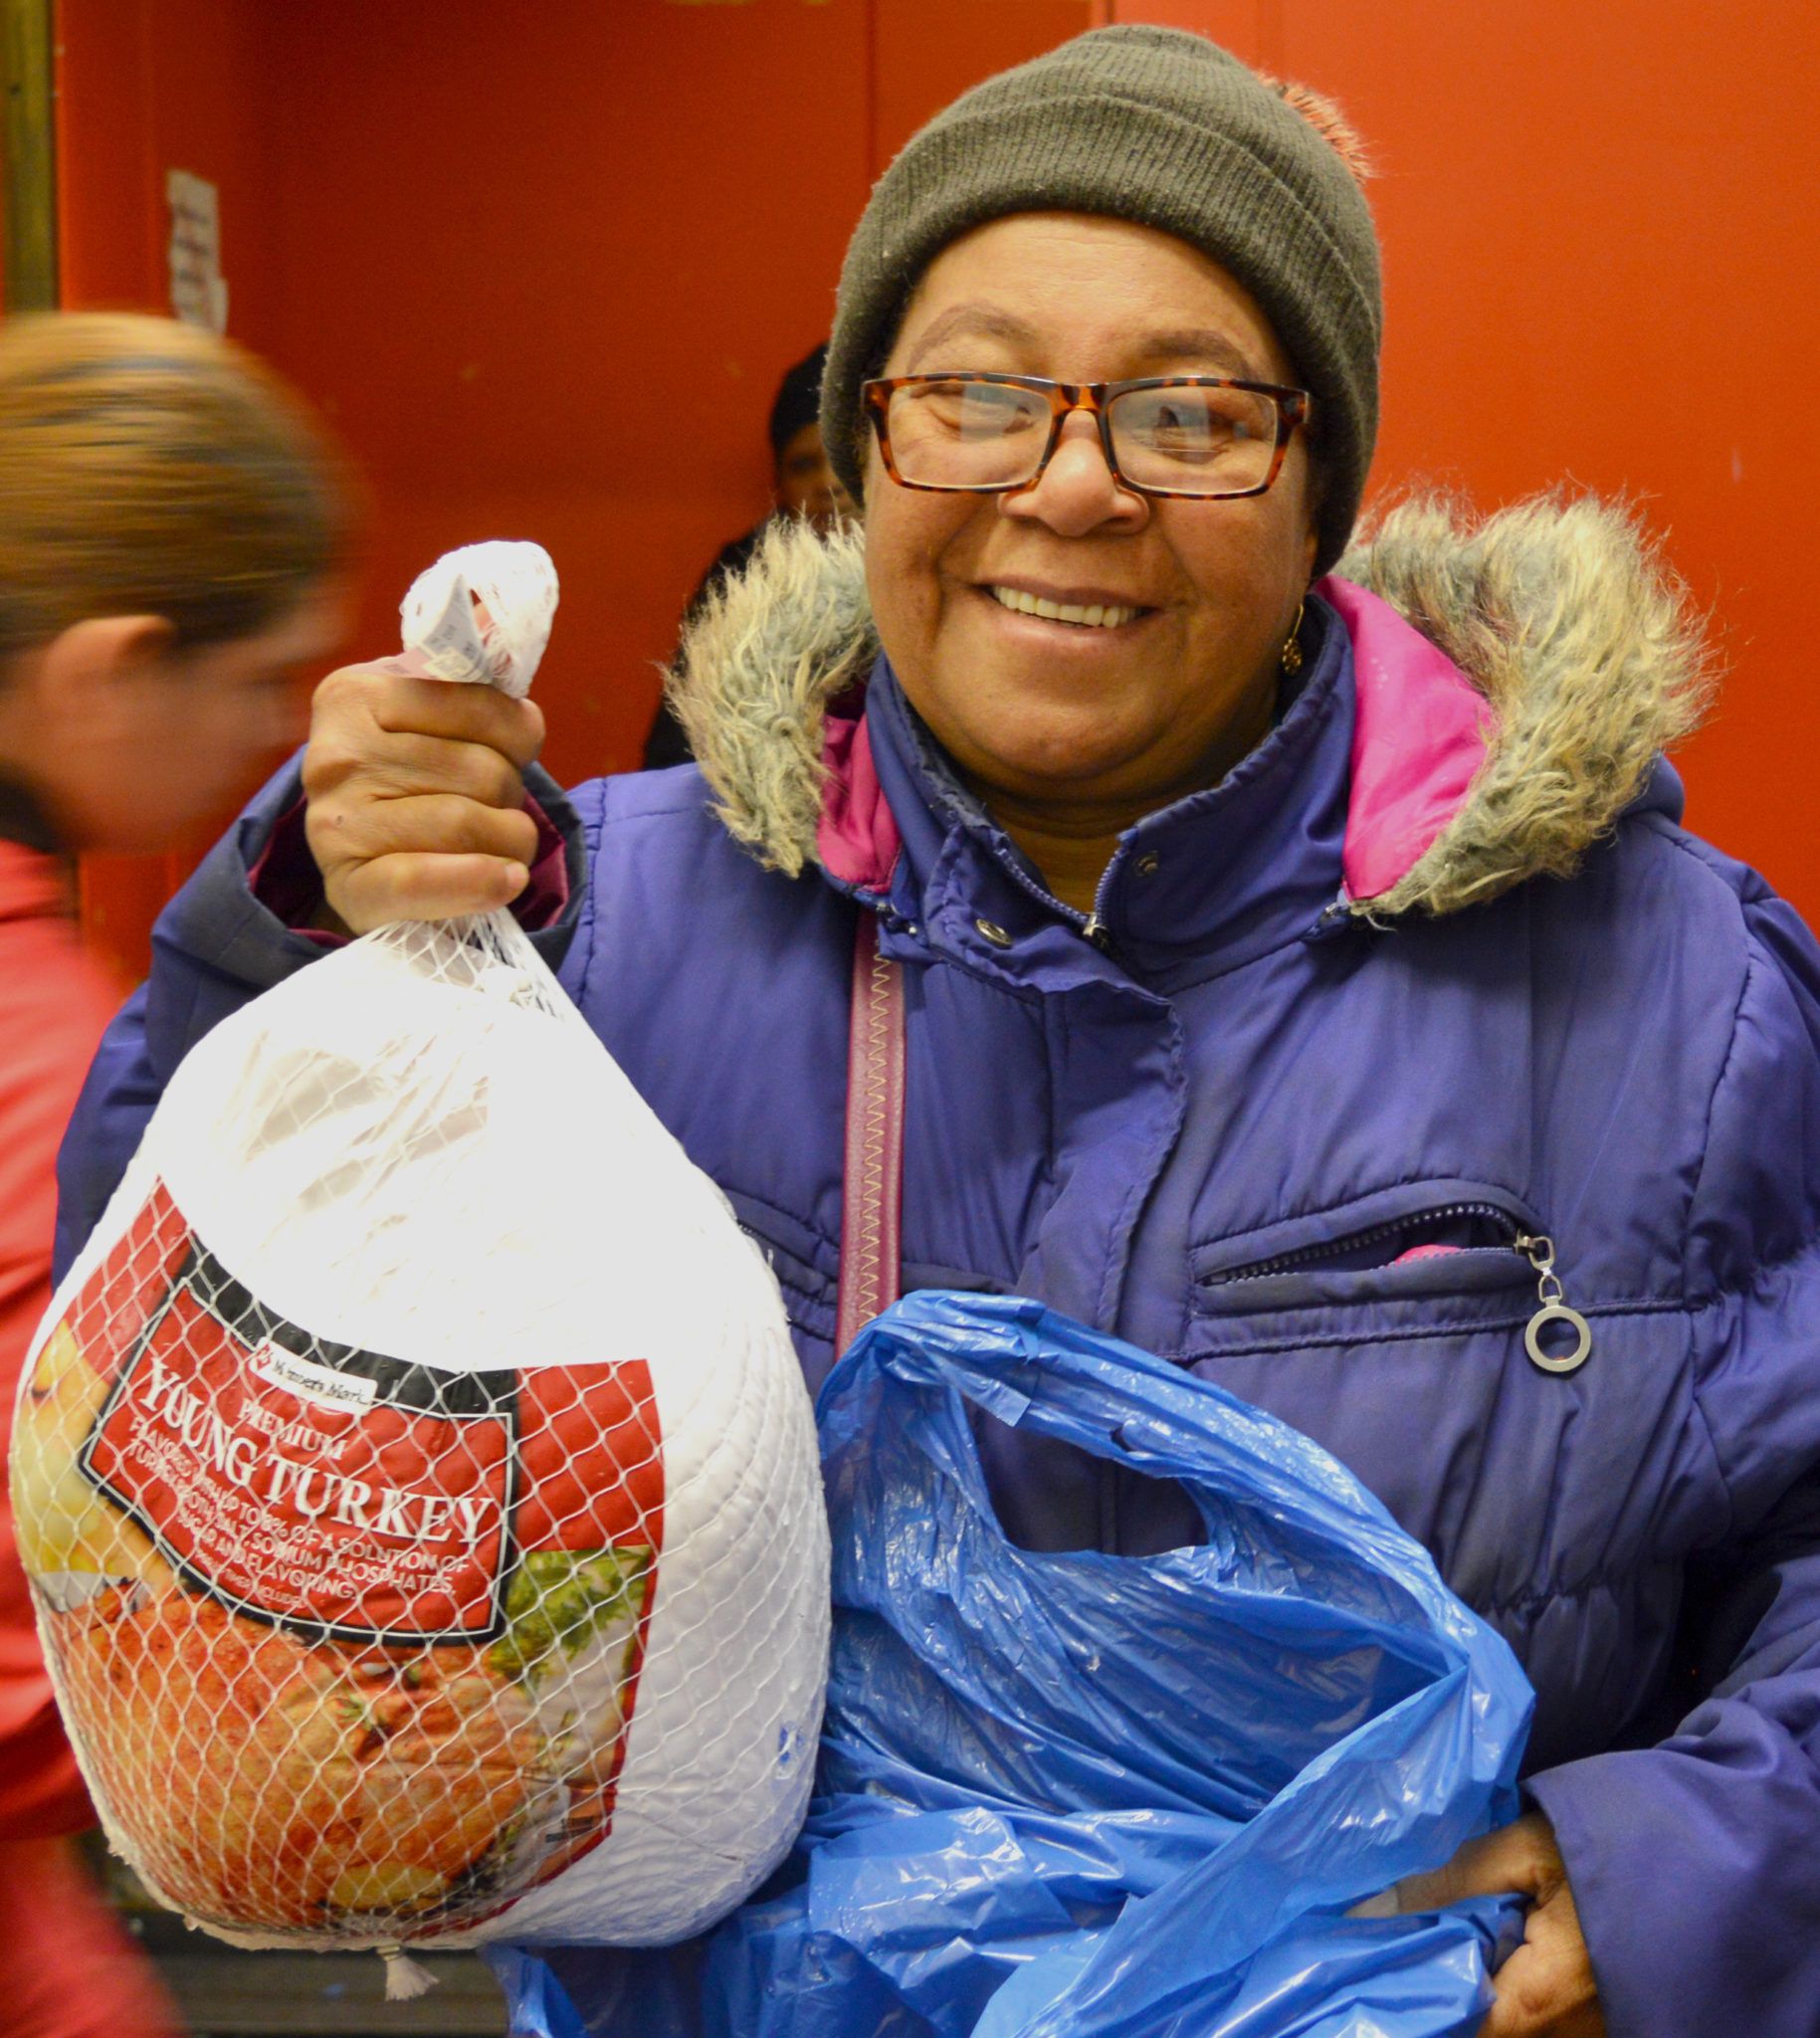 Feed your neighbors this Thanksgiving through CAMBA’s turkey drive